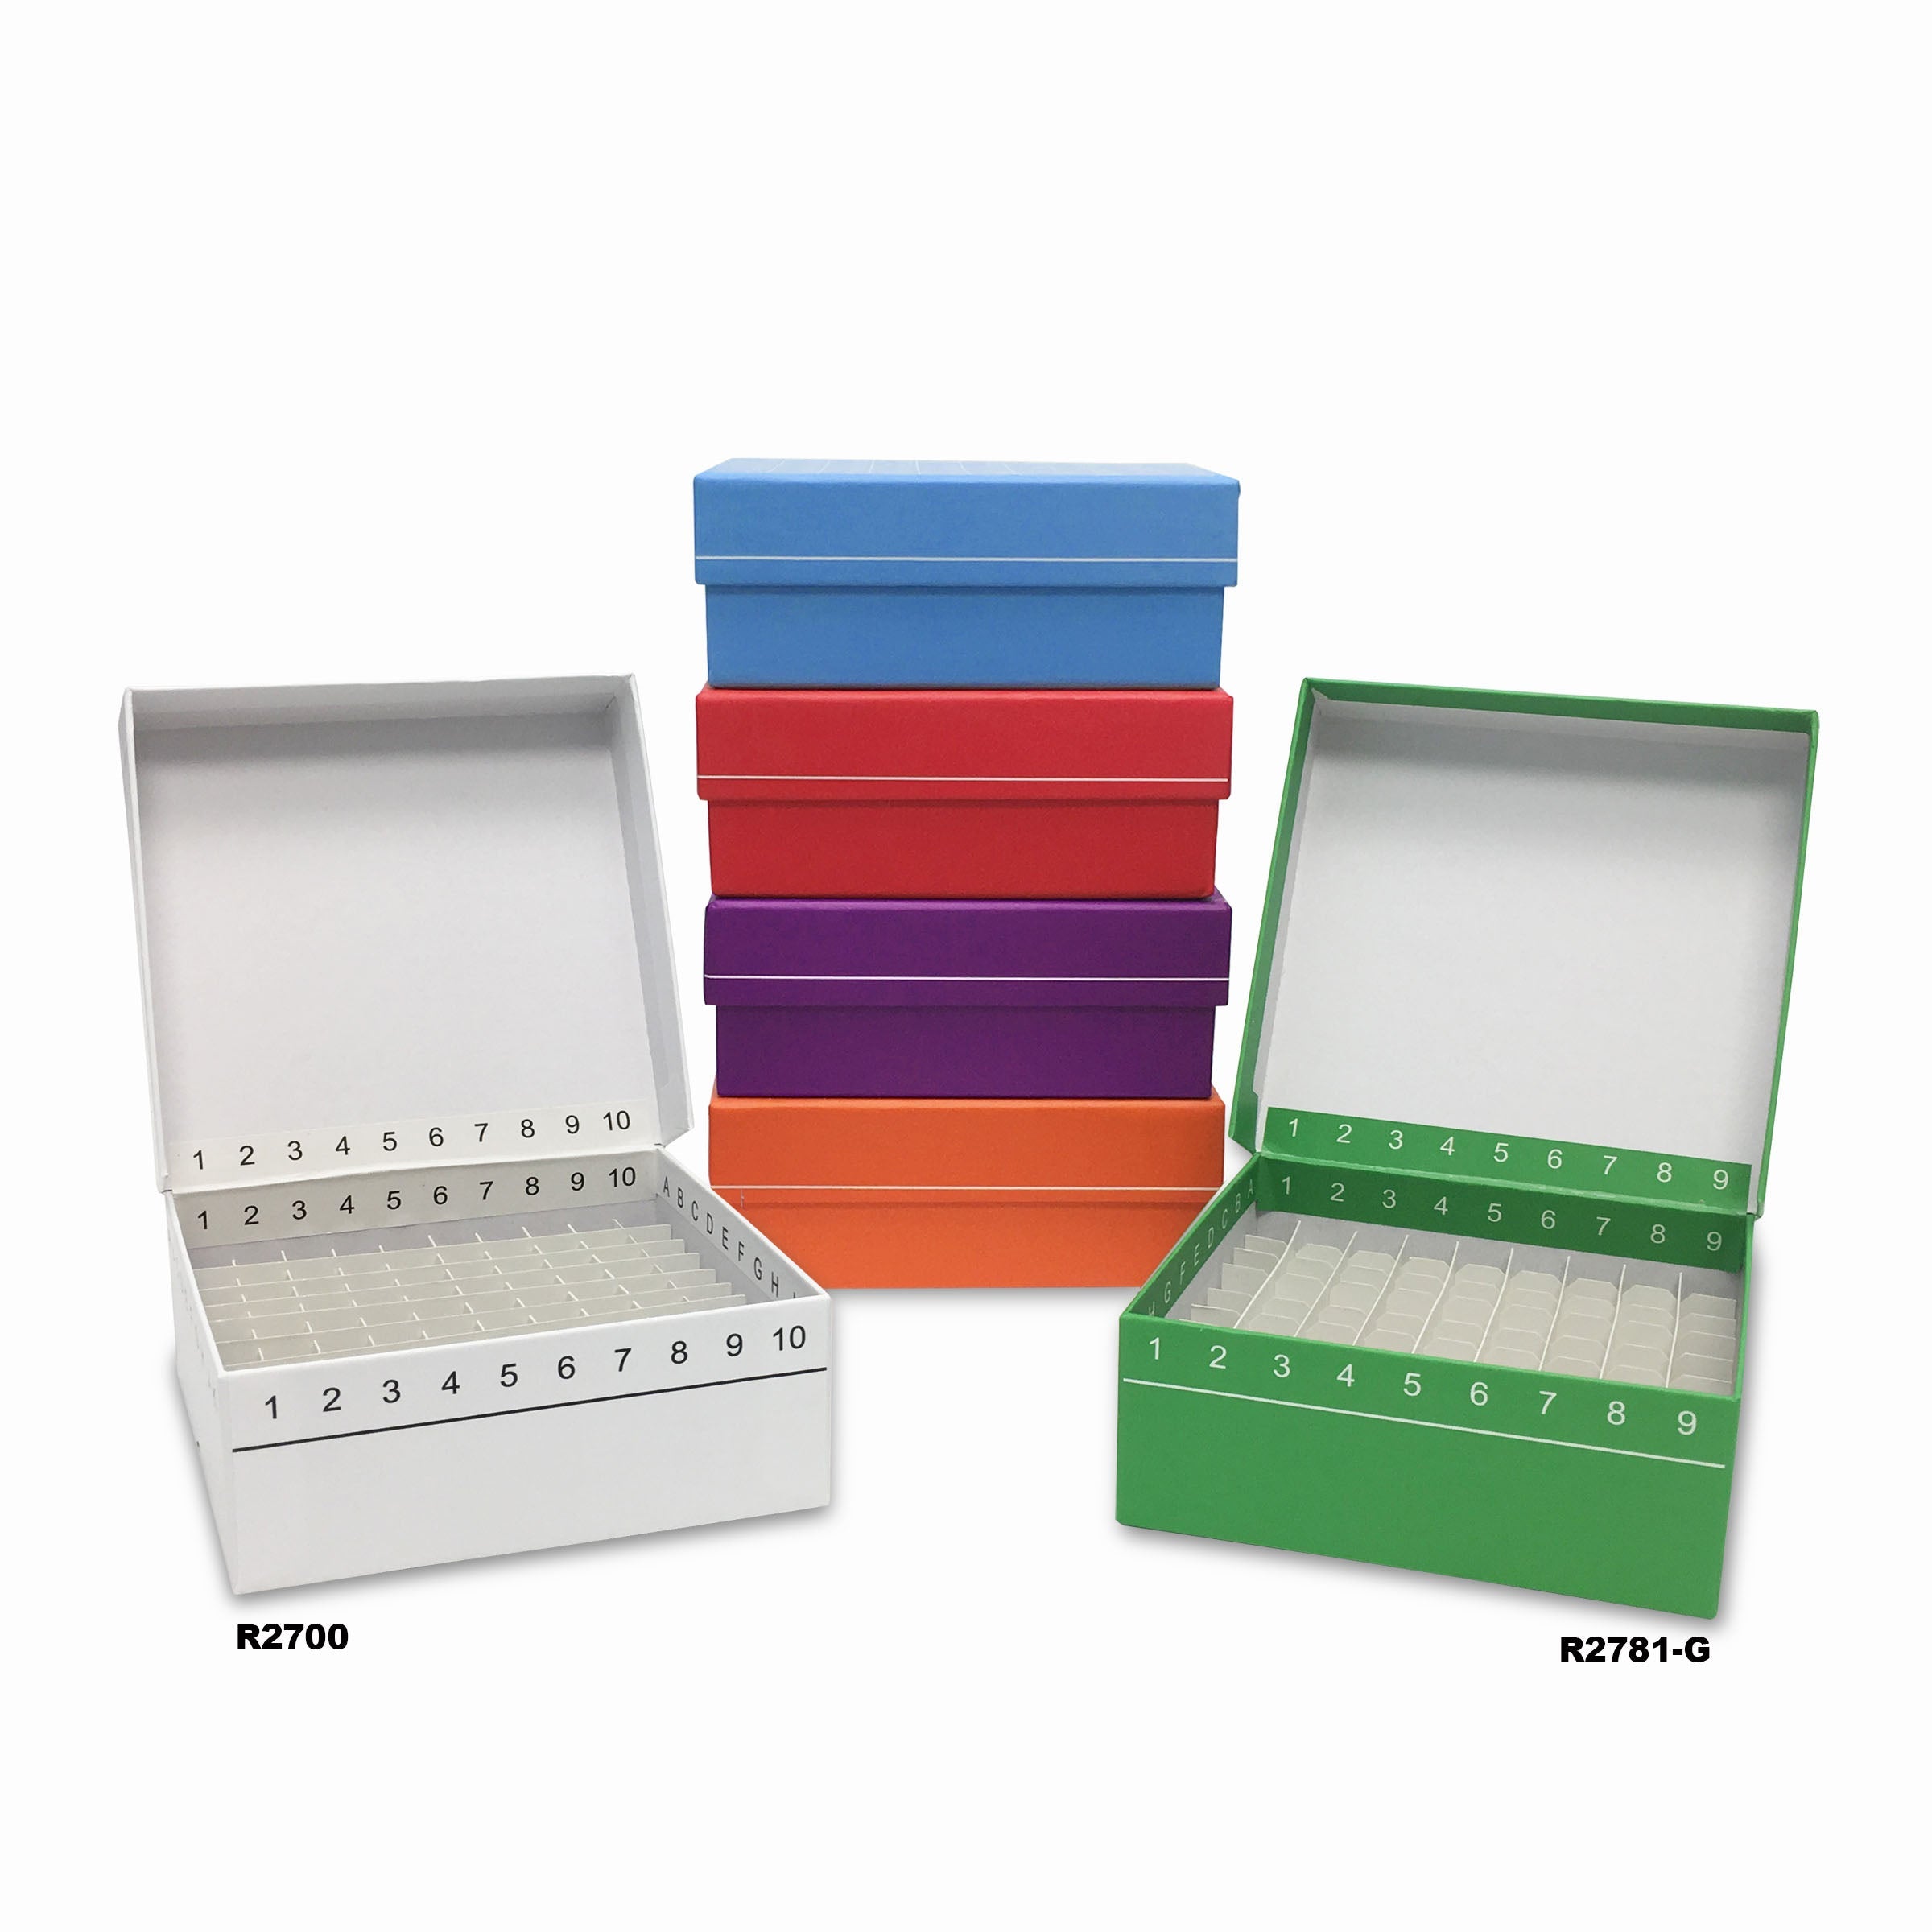 MTC Bio R2781-G, Fliptop Carboard Freezer Box with Attached Hinged Lid, 81-Place, Green, 5/pk